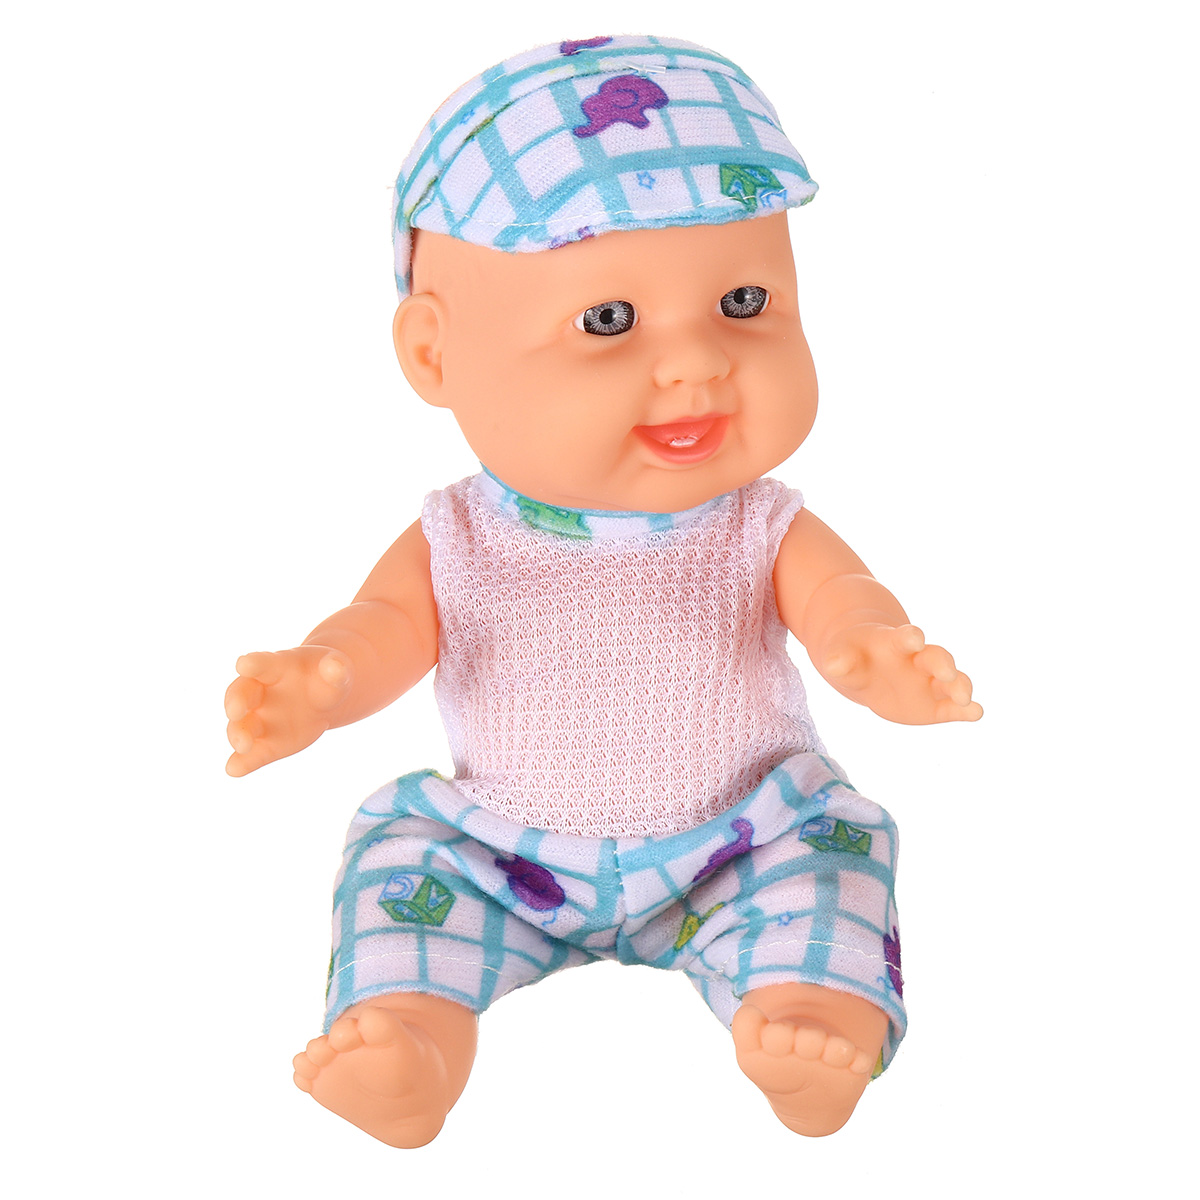 Simulation-Baby-3D-Creative-Cute-Doll-Play-House-Toy-Doll-Vinyl-Doll-Gift-1818655-13